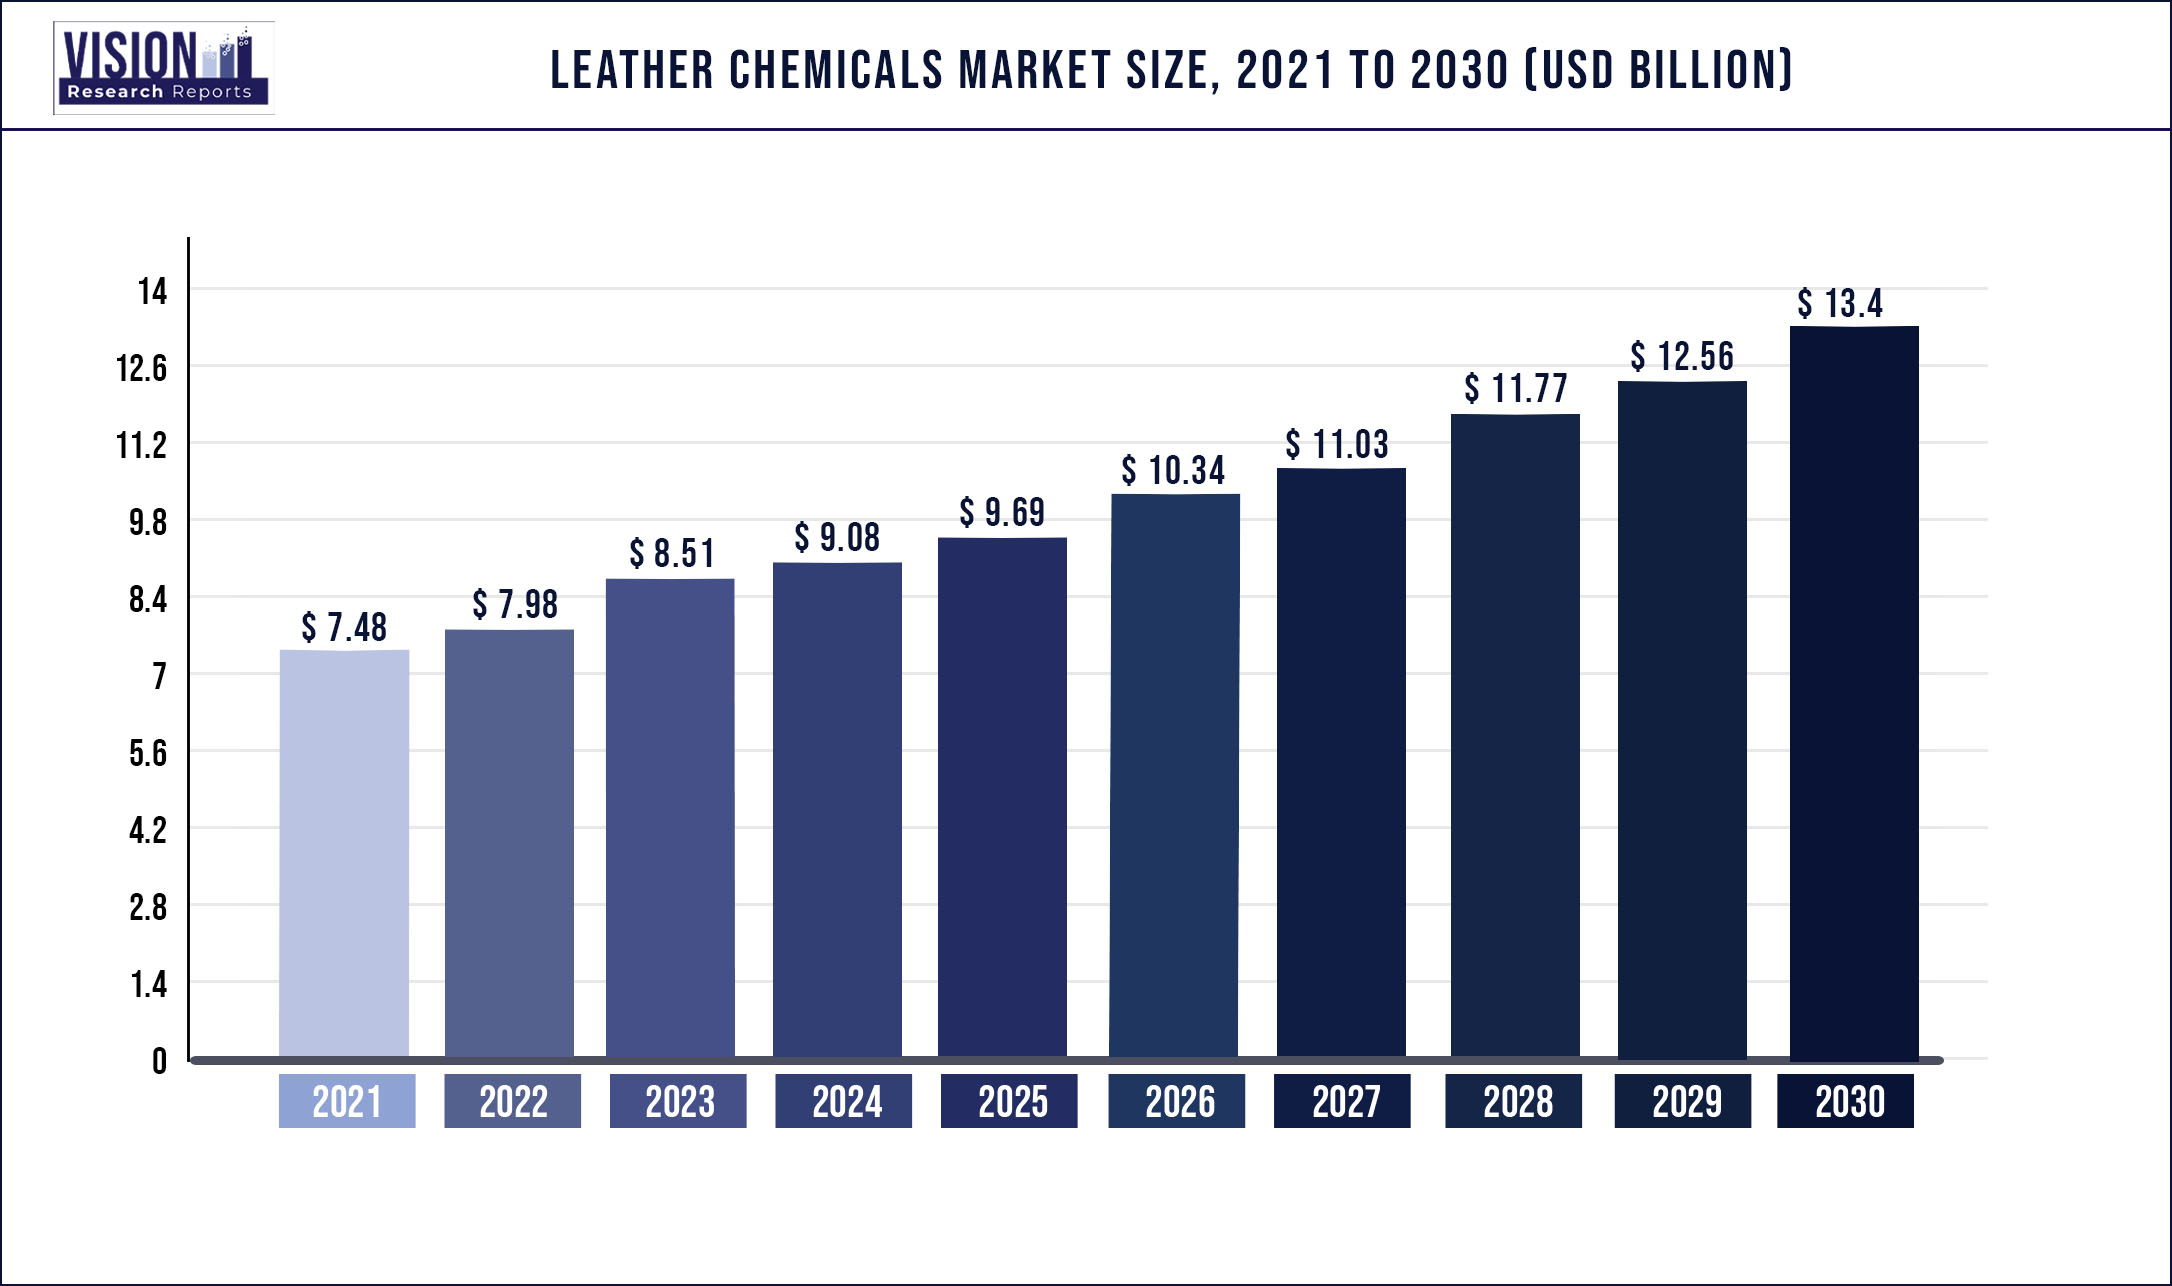 Leather Chemicals Market Size 2021 to 2030